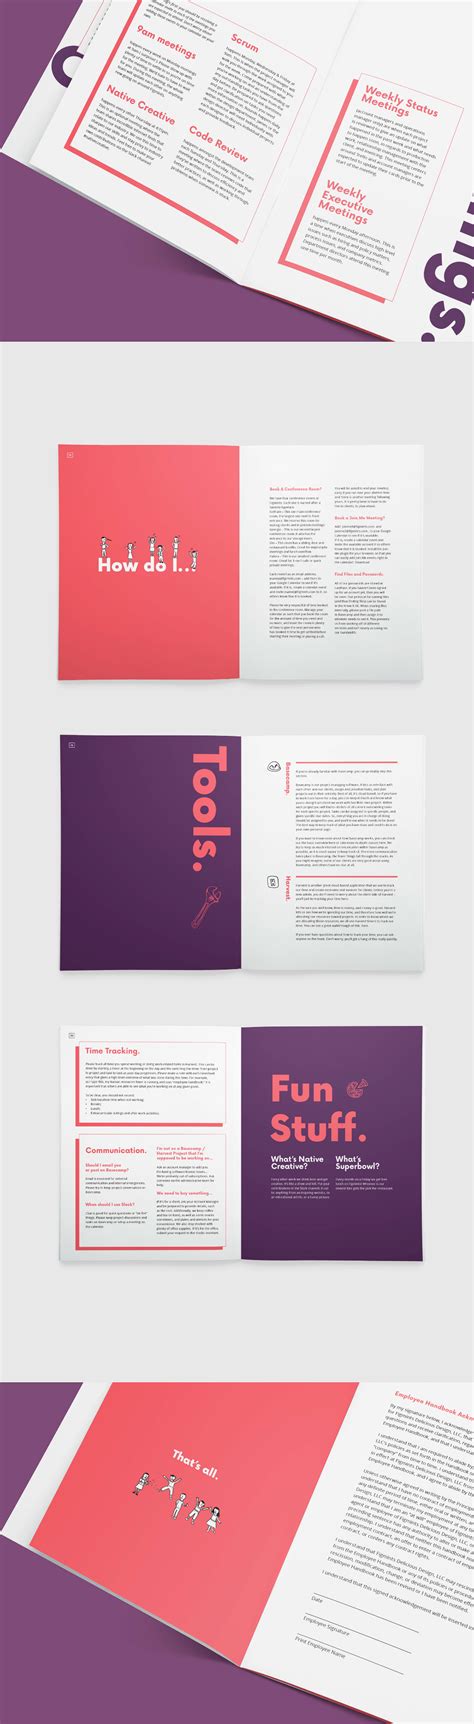 Not only does the handbook provide new employees with an overview of the company's the employee handbook is more than just a guide and on overview of the company. Figmints Employee Handbook on Behance in 2020 | Employee ...